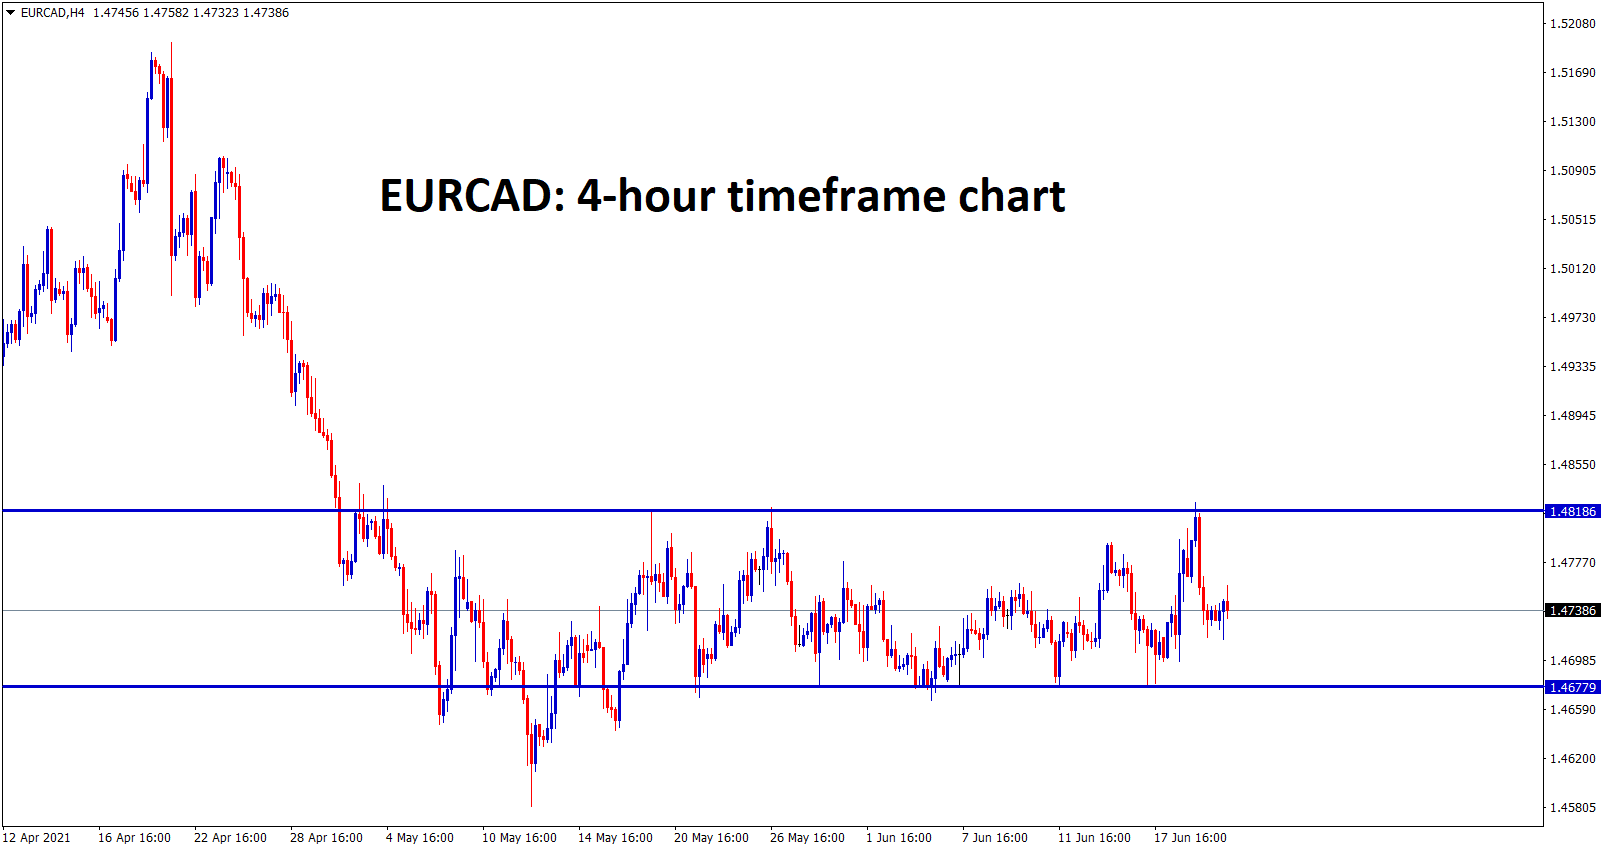 EURCAD is ranging between the small support and resistance level